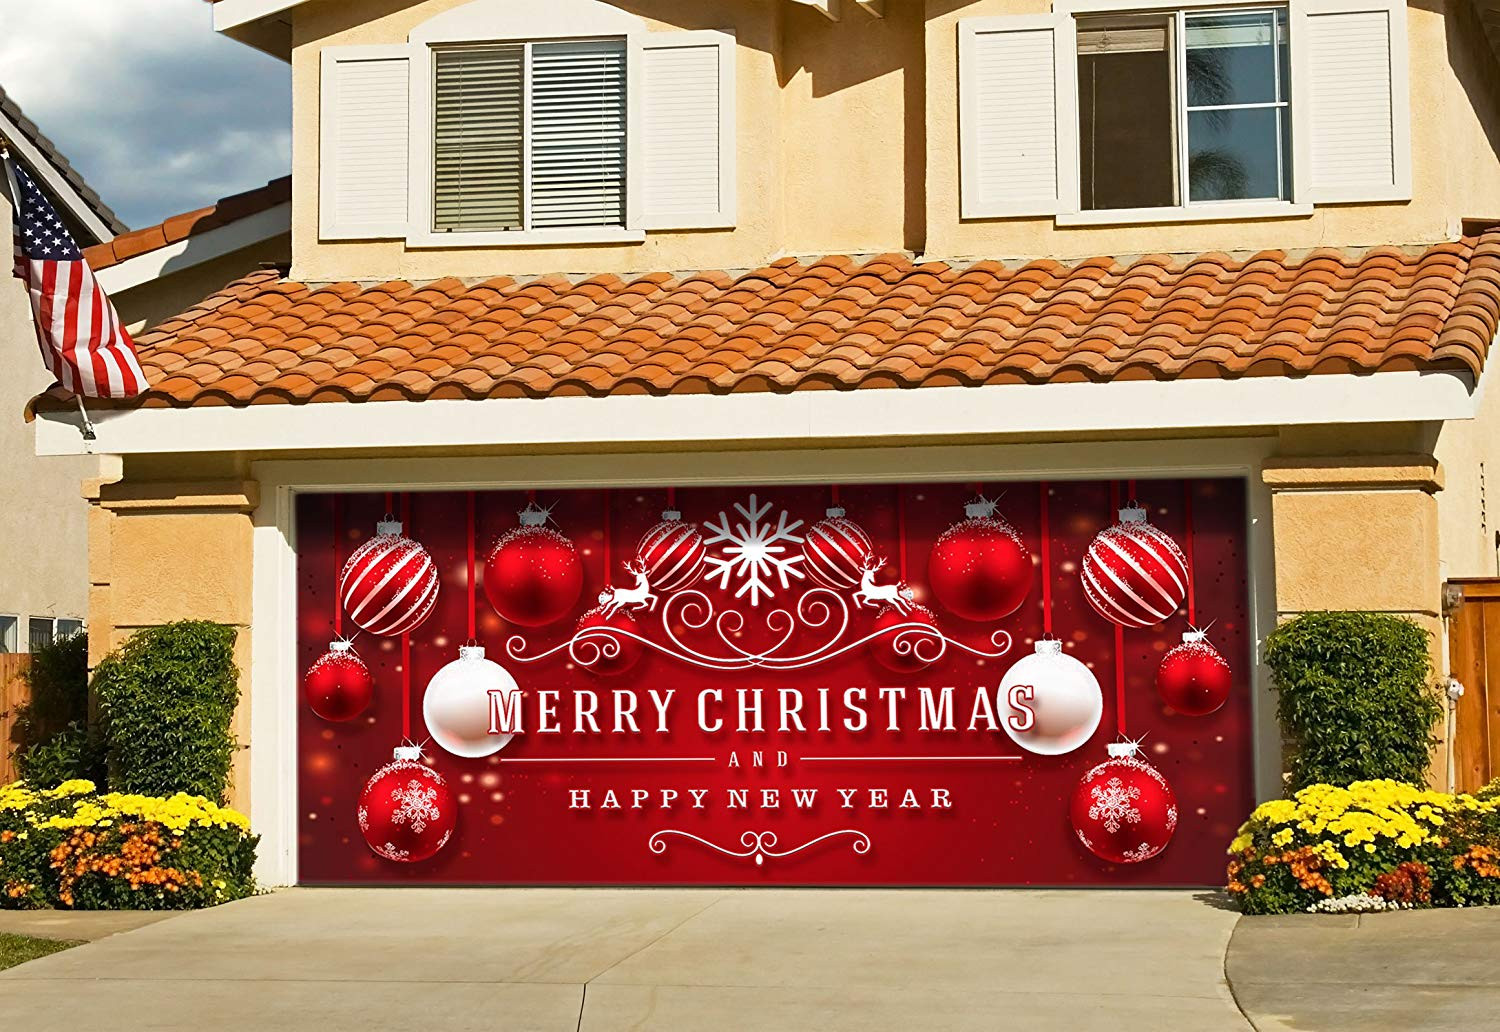 Garage Christmas Decorations
 Christmas Garage Door Decorations to Make Create and